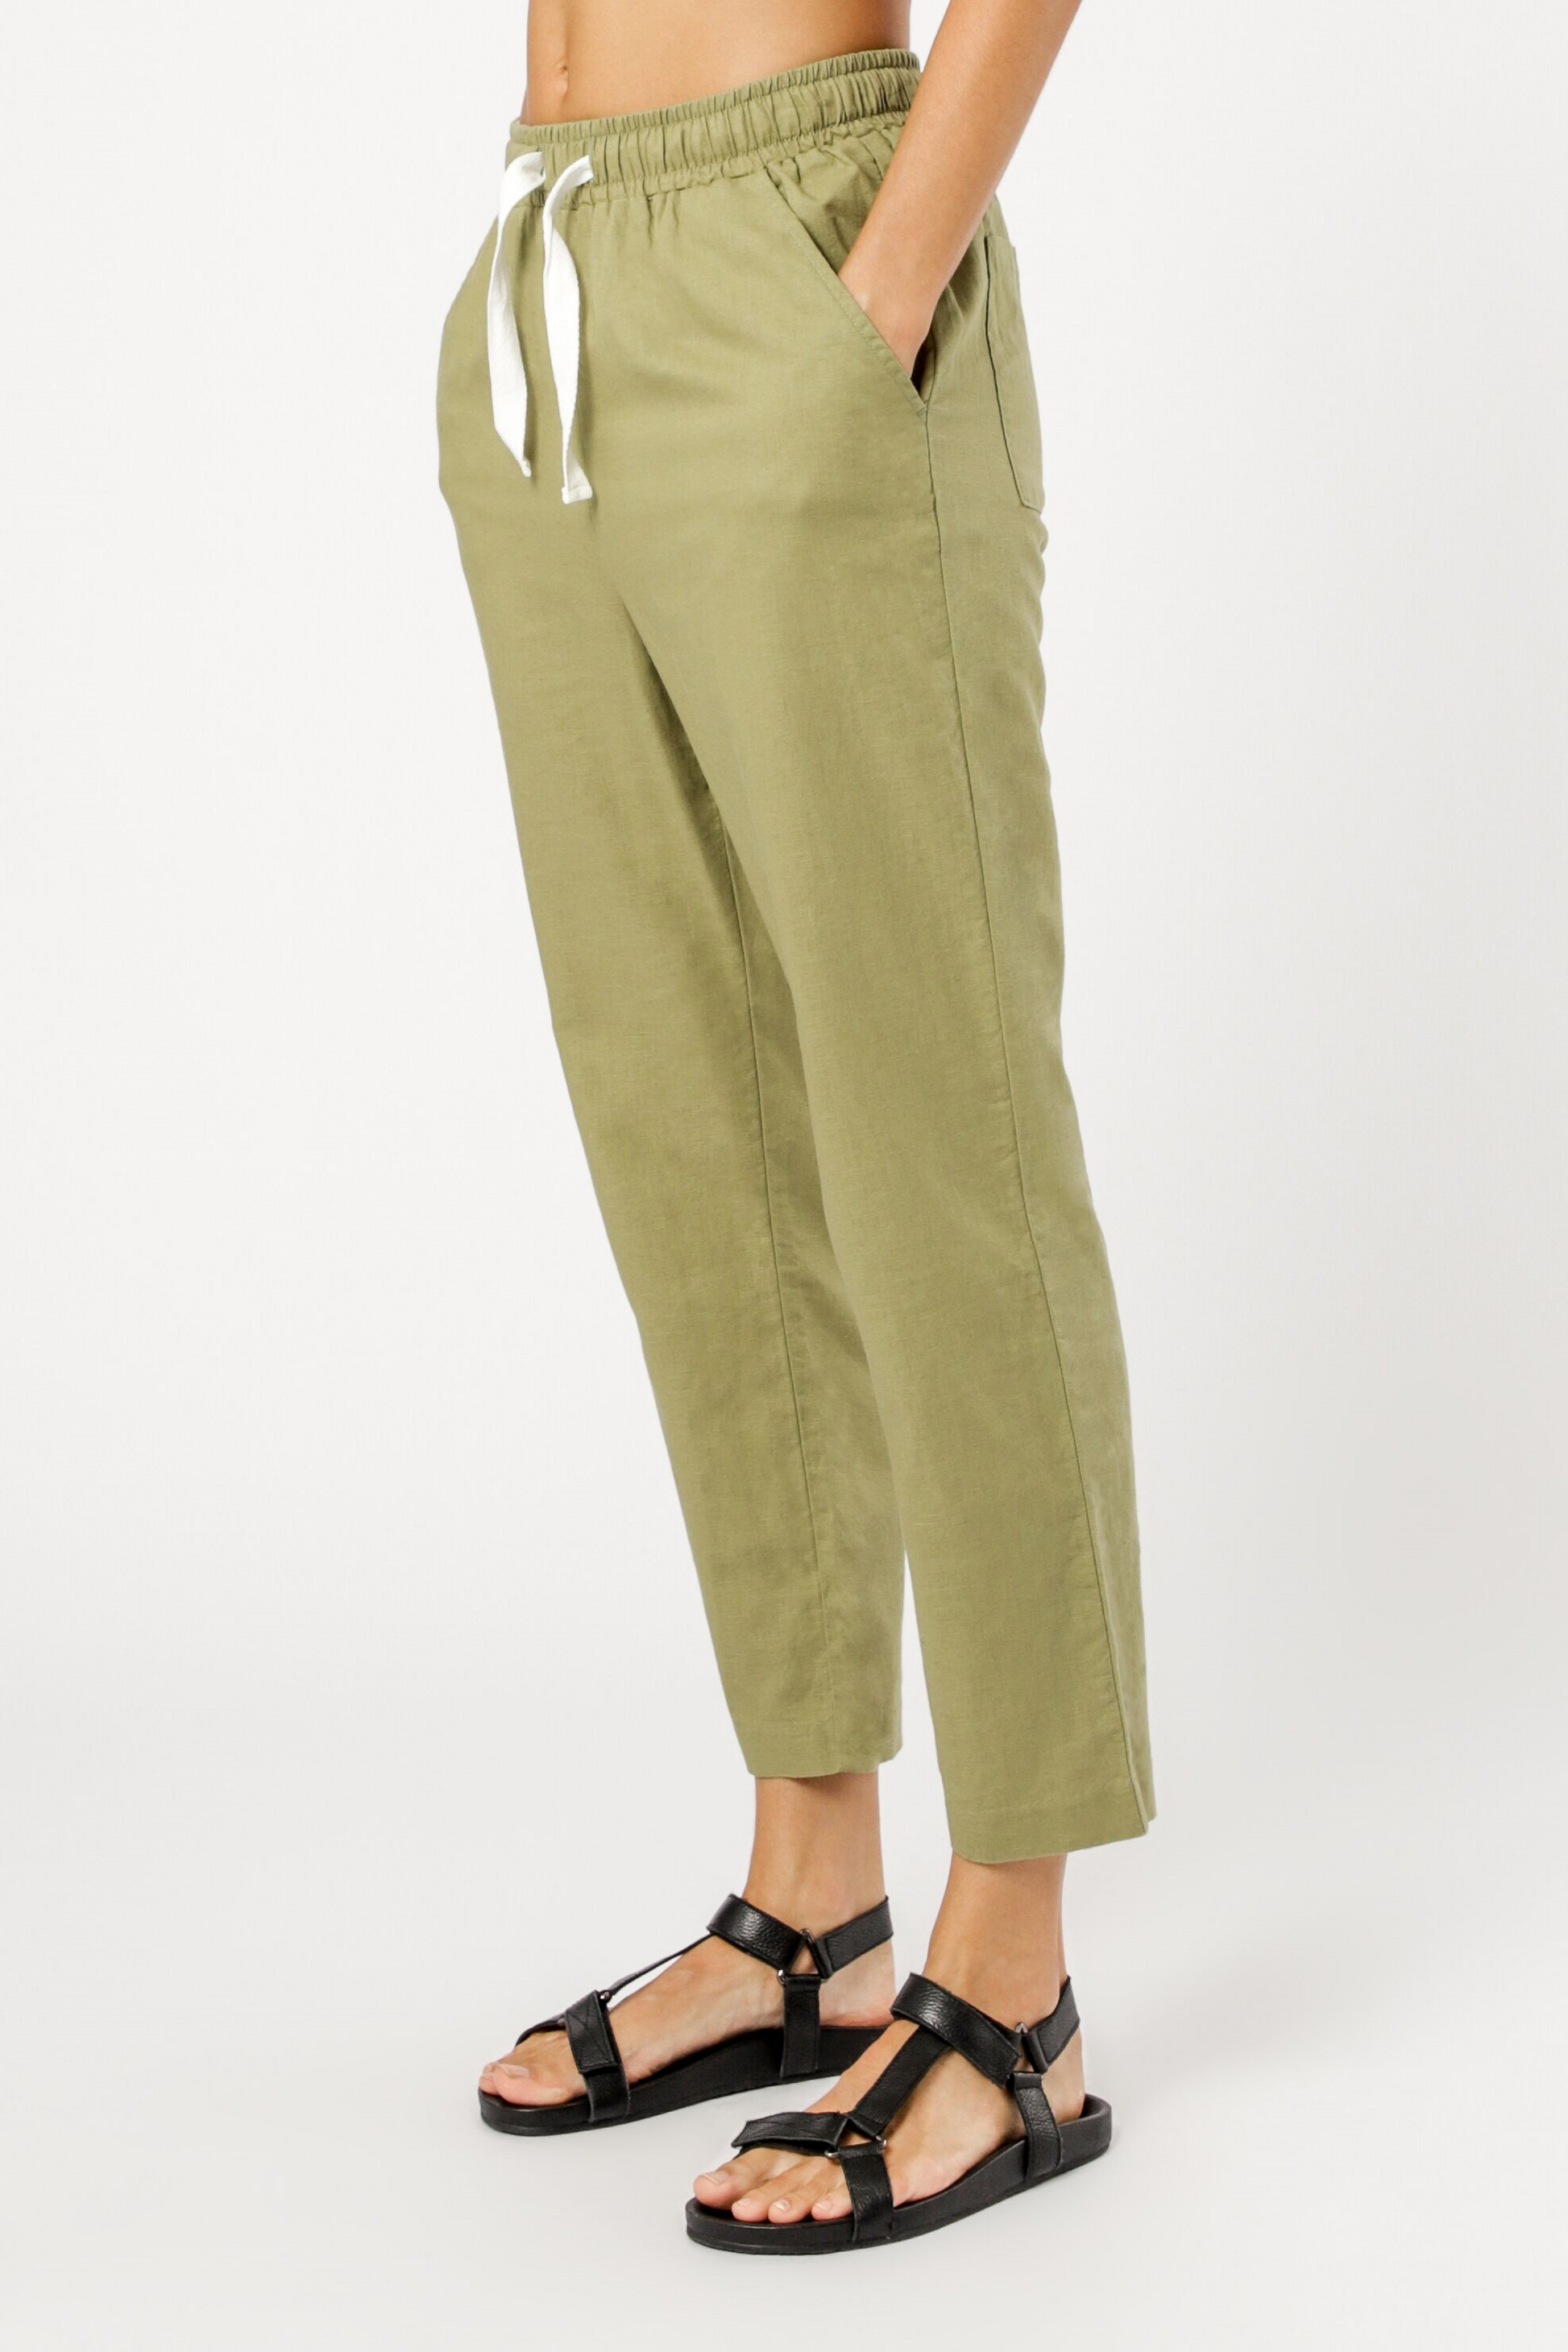 Nude Lucy nude classic pant army pants